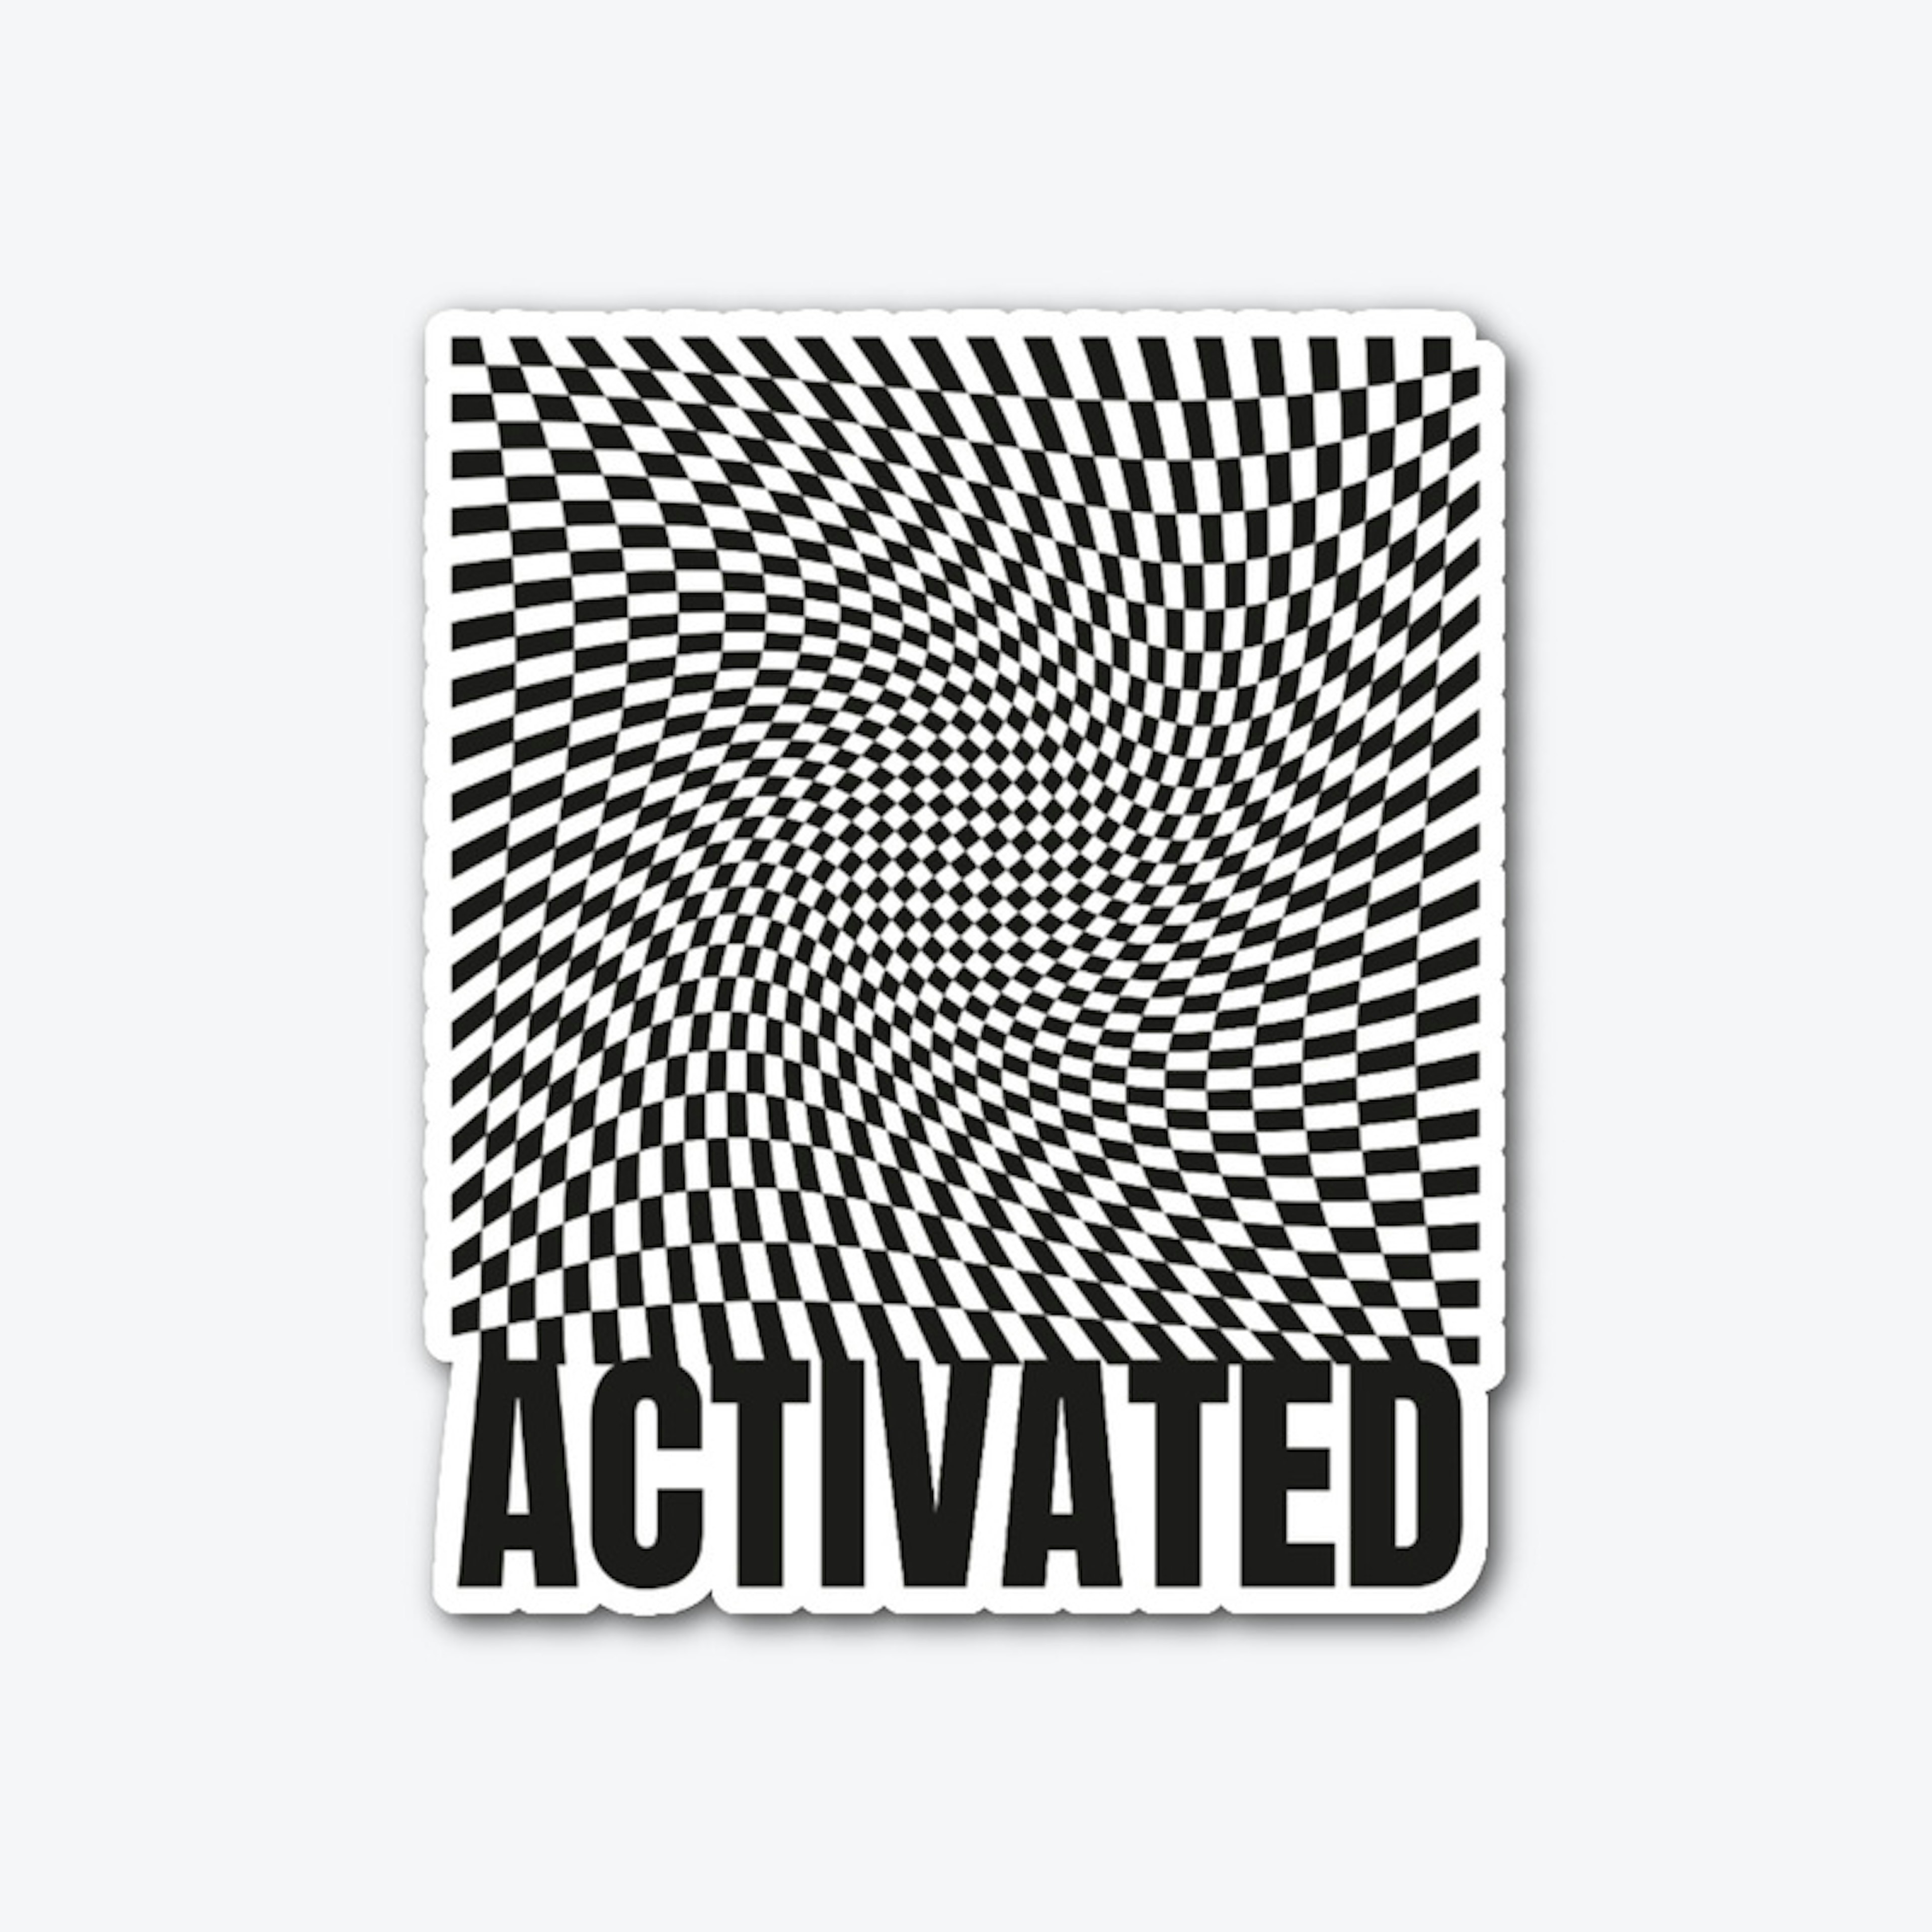 "ACTIVATED" Optical Illusion Apparel 